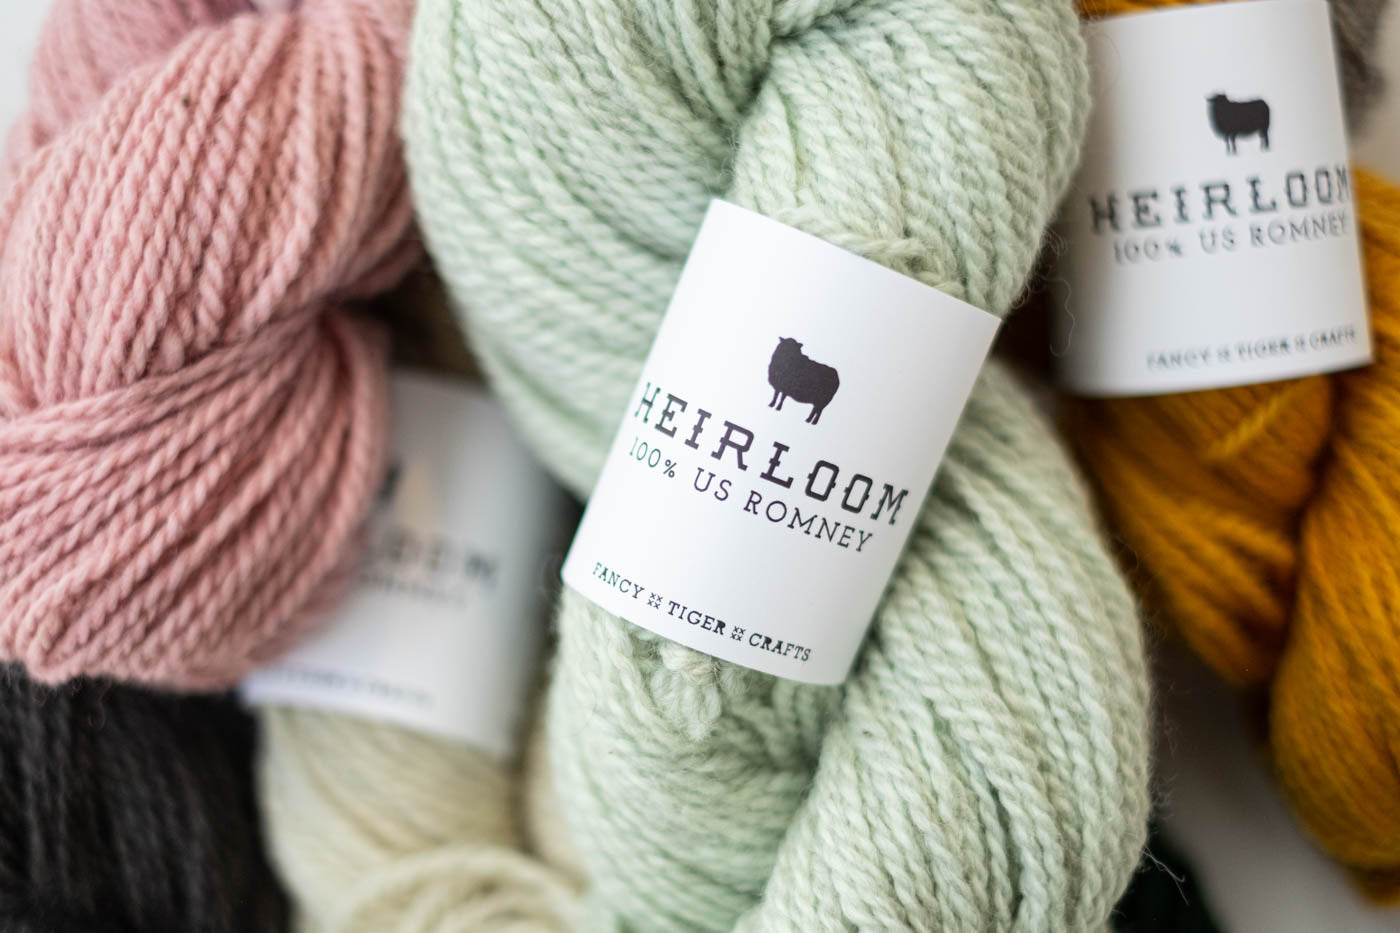 Up close photograph of yarn to show the newly designed labels.